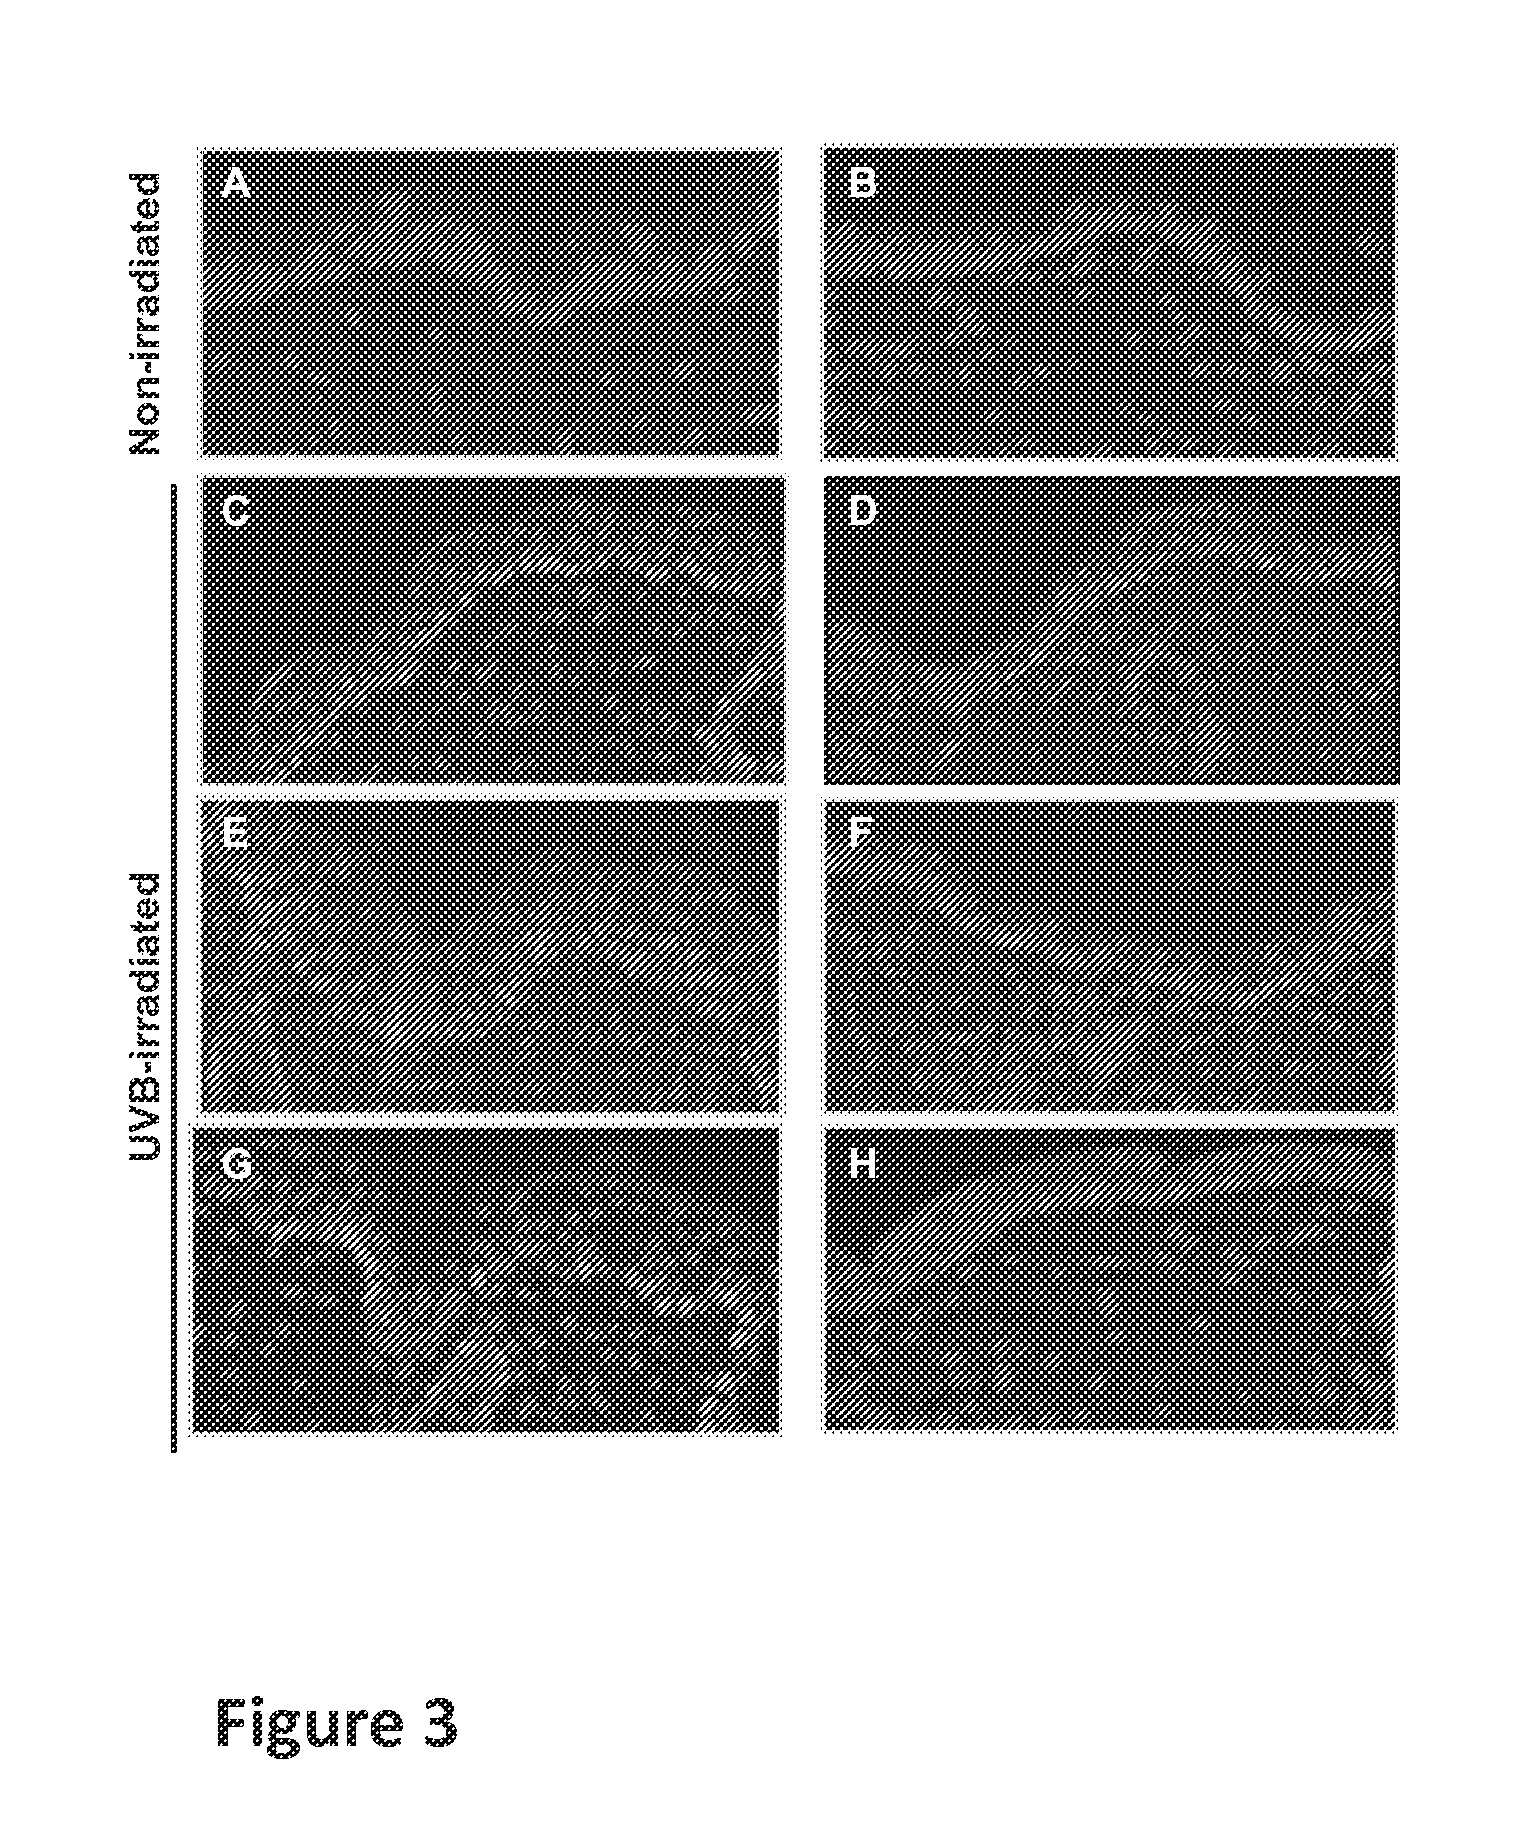 Method for treating cell proliferation disorders